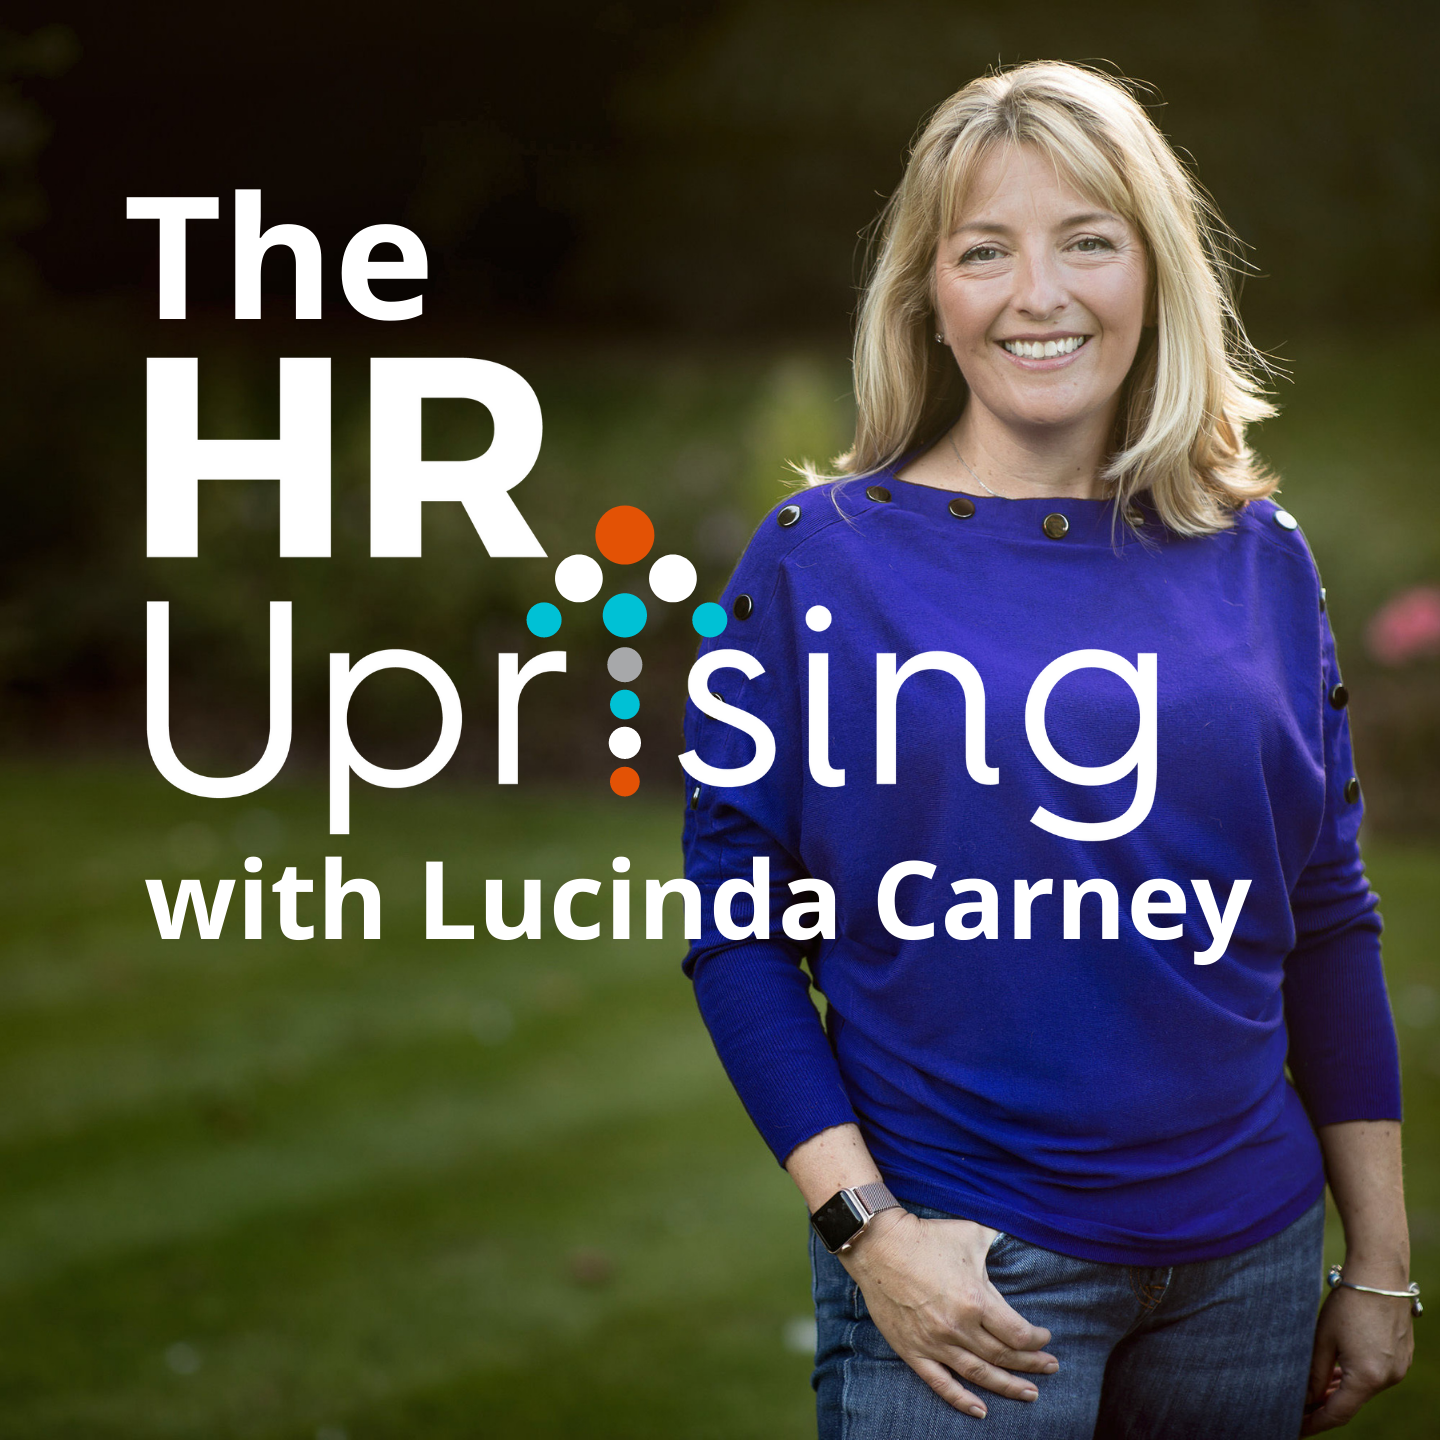 L&D Skills For HR People - with Katy Walton